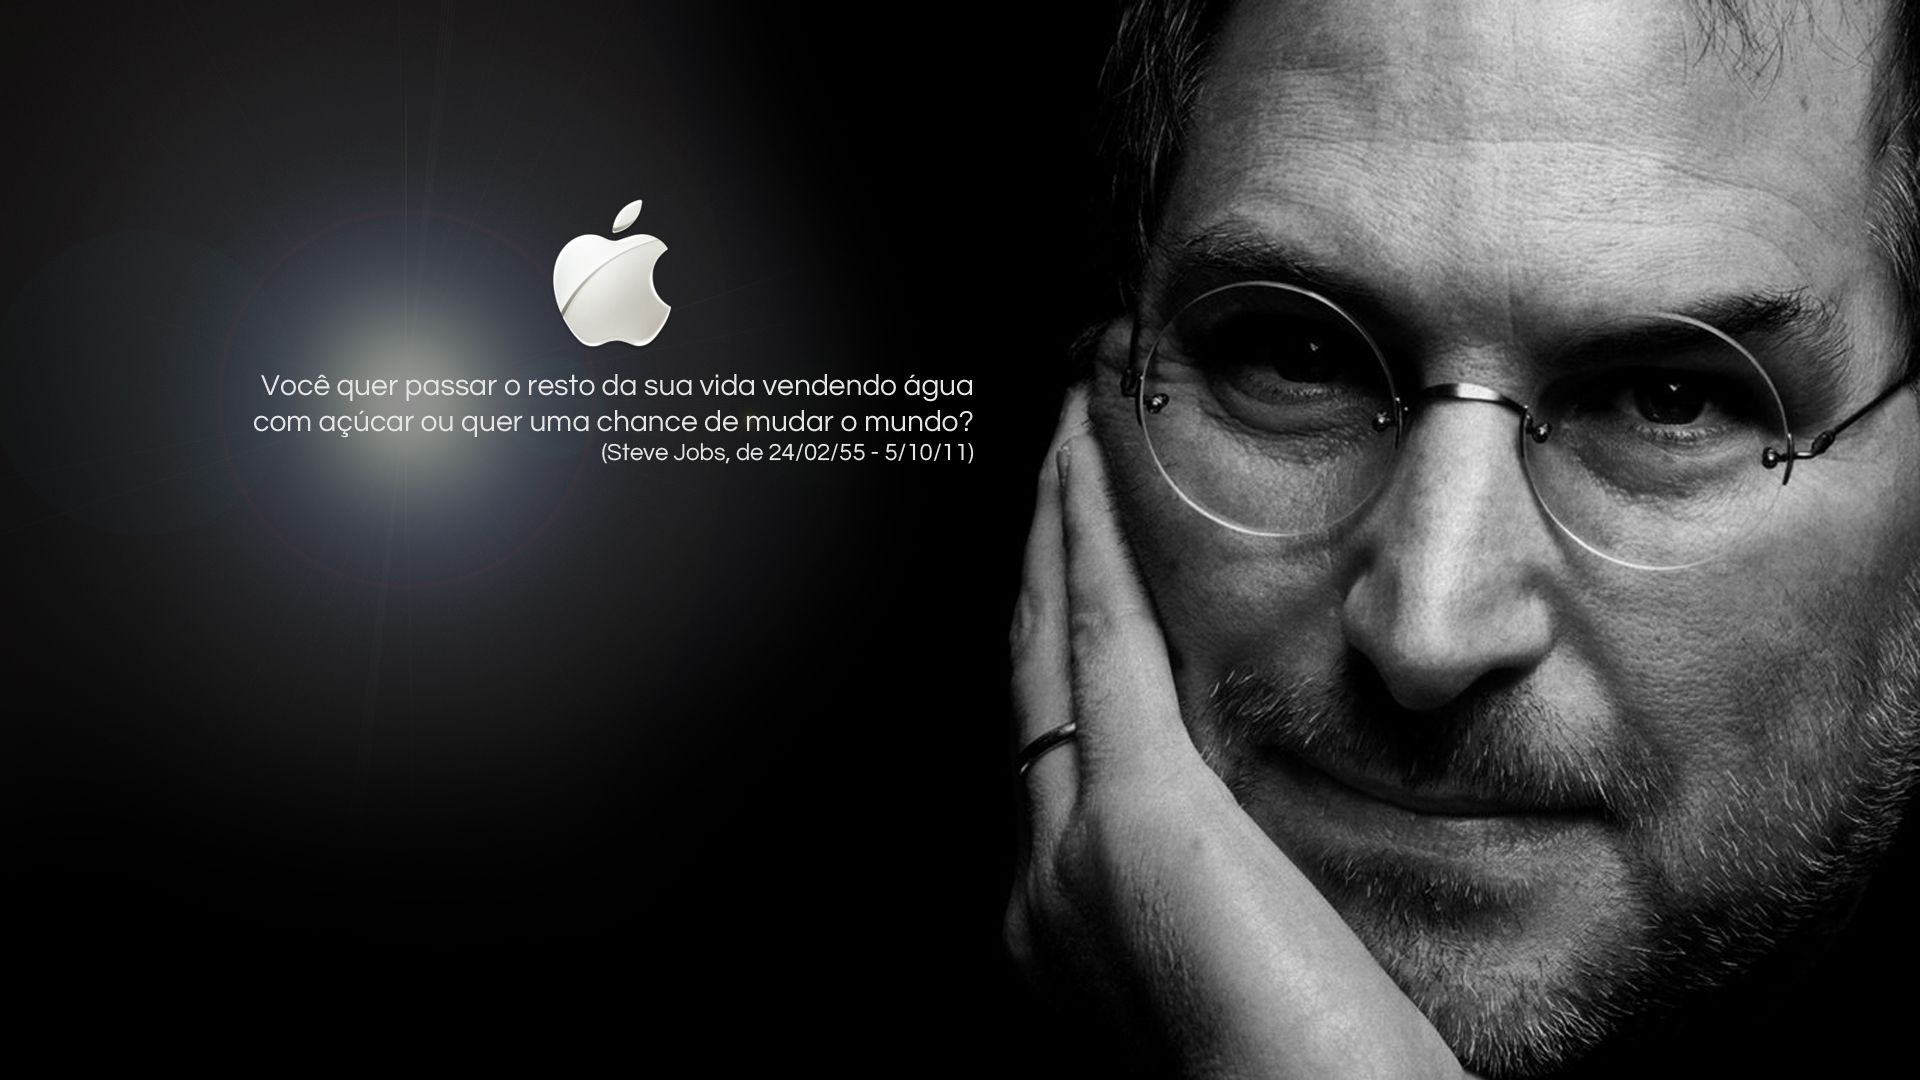 IPhone X Wallpaper - (Steve Jobs Quotes) Free Download on Behance